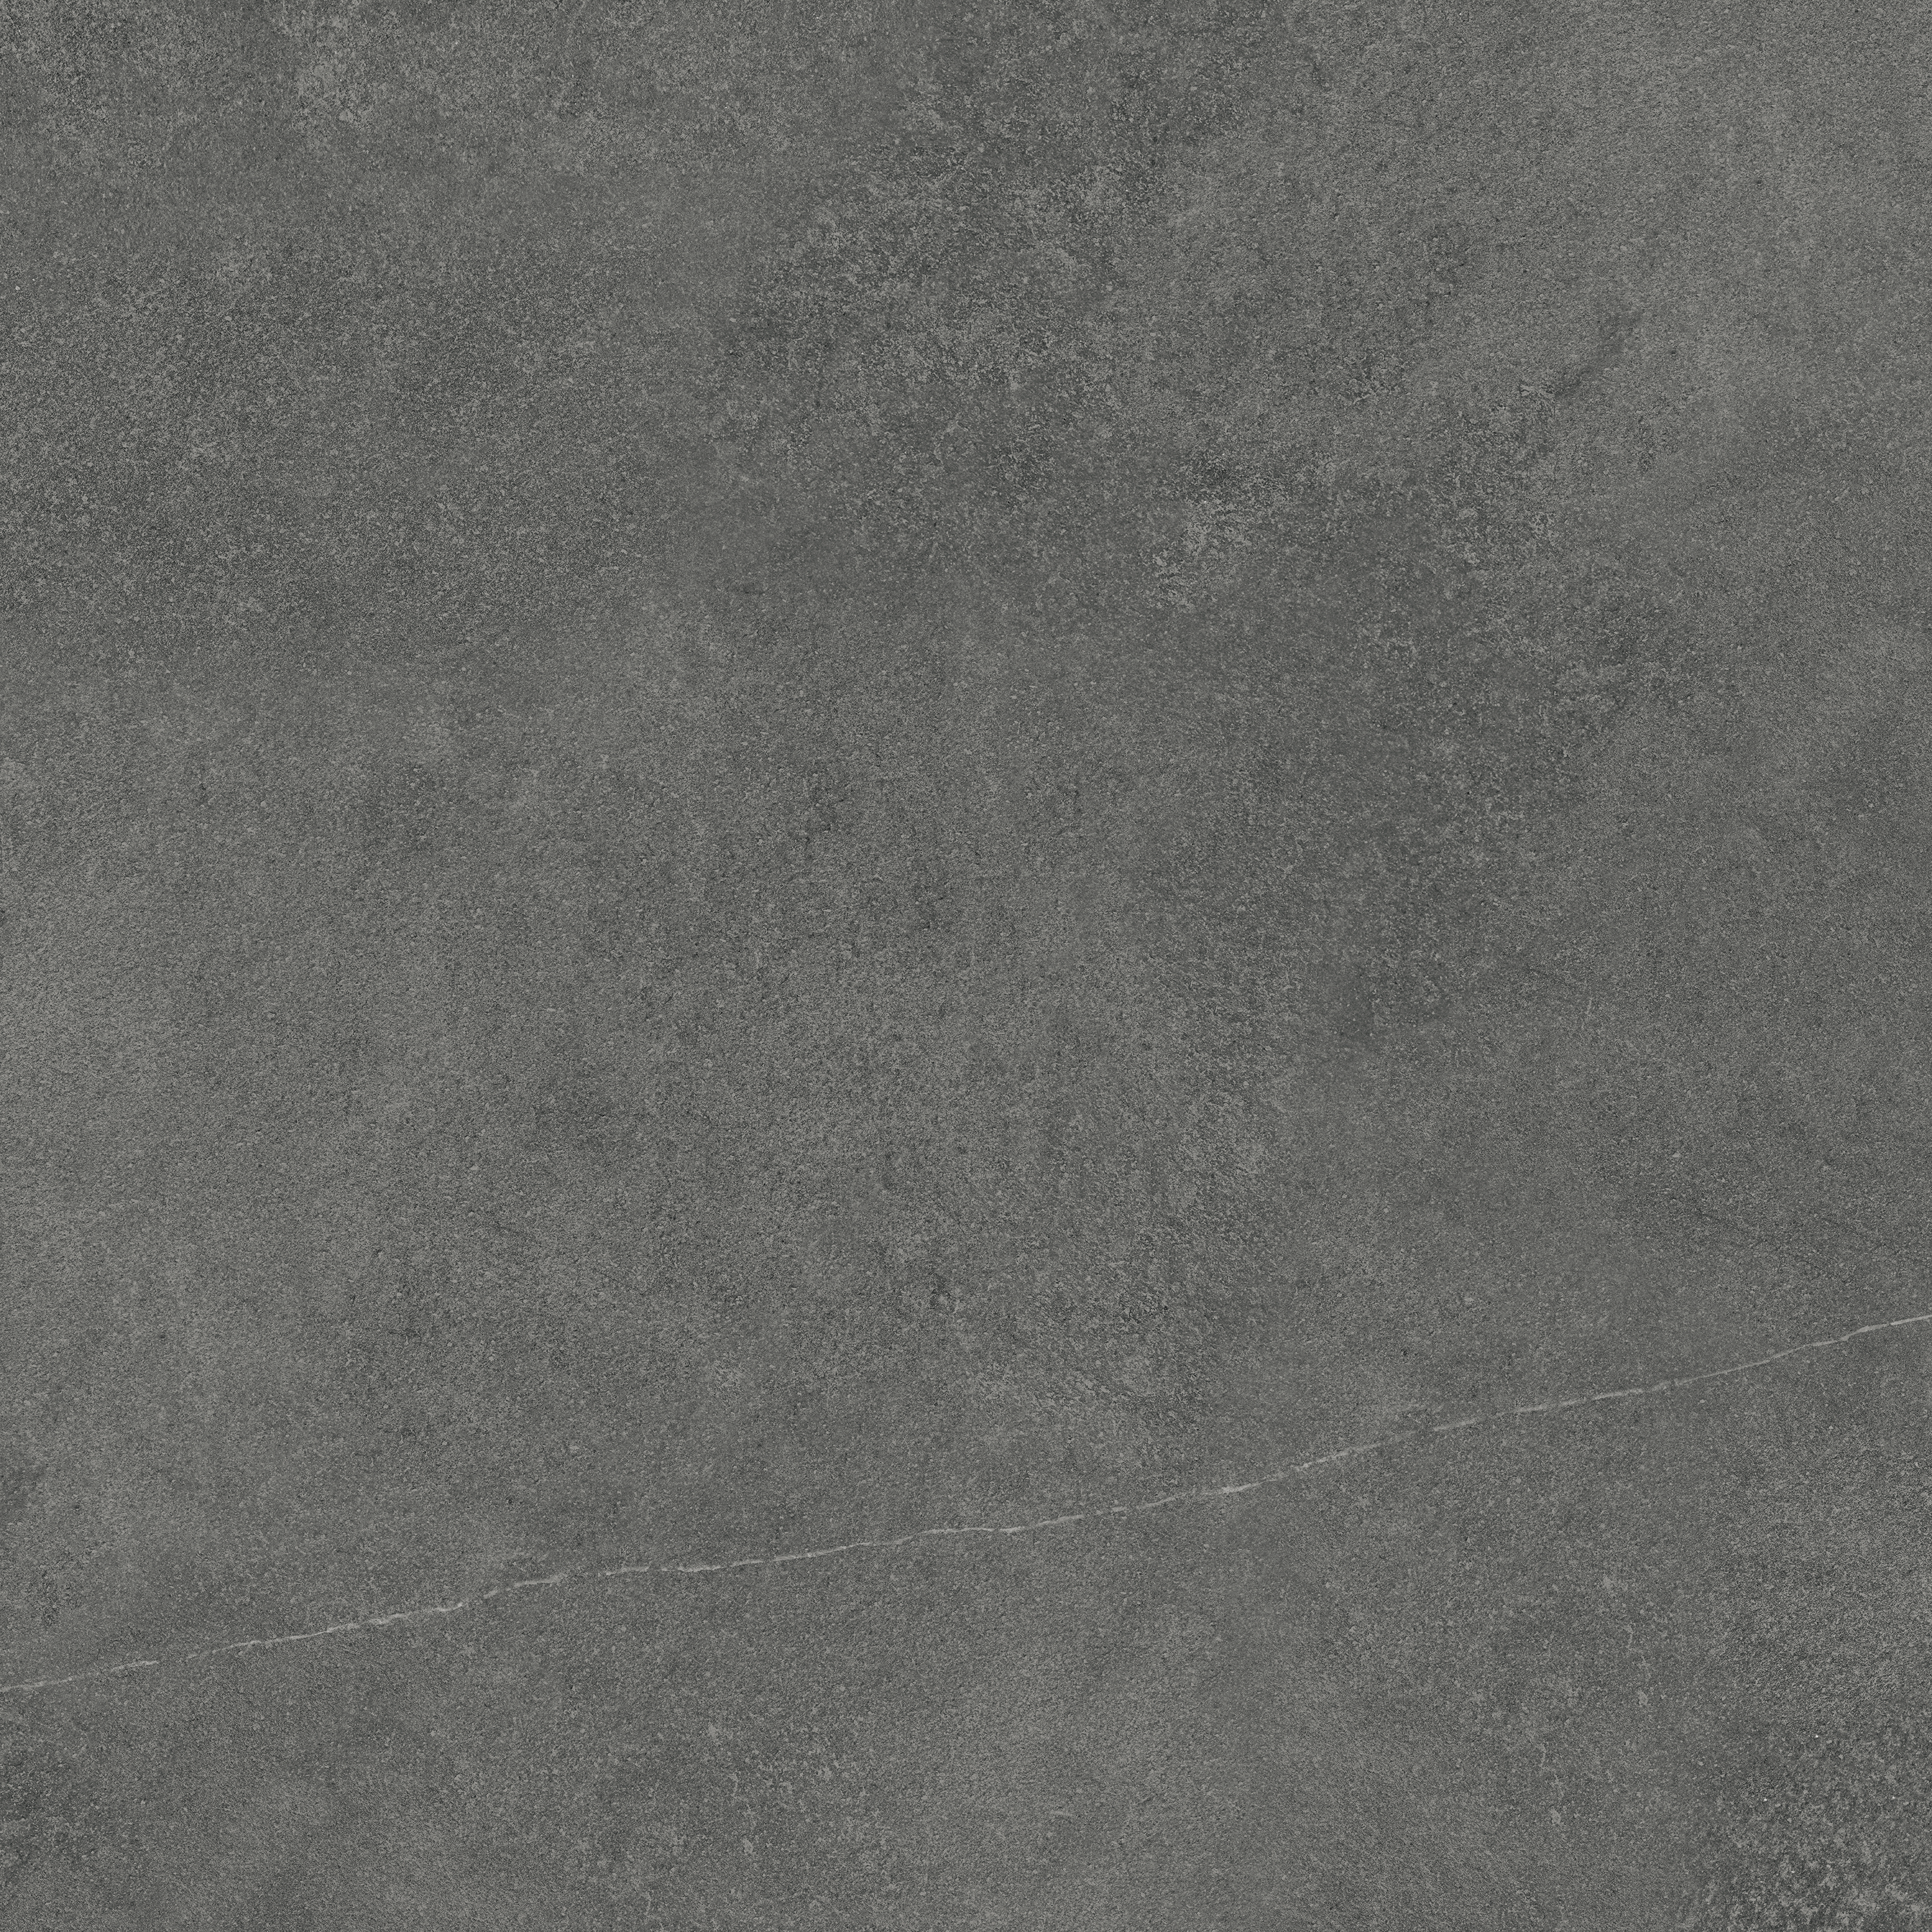 carbon pattern color body porcelain field tile from mjork anatolia collection distributed by surface group international matte finish rectified edge 32x32 square shape